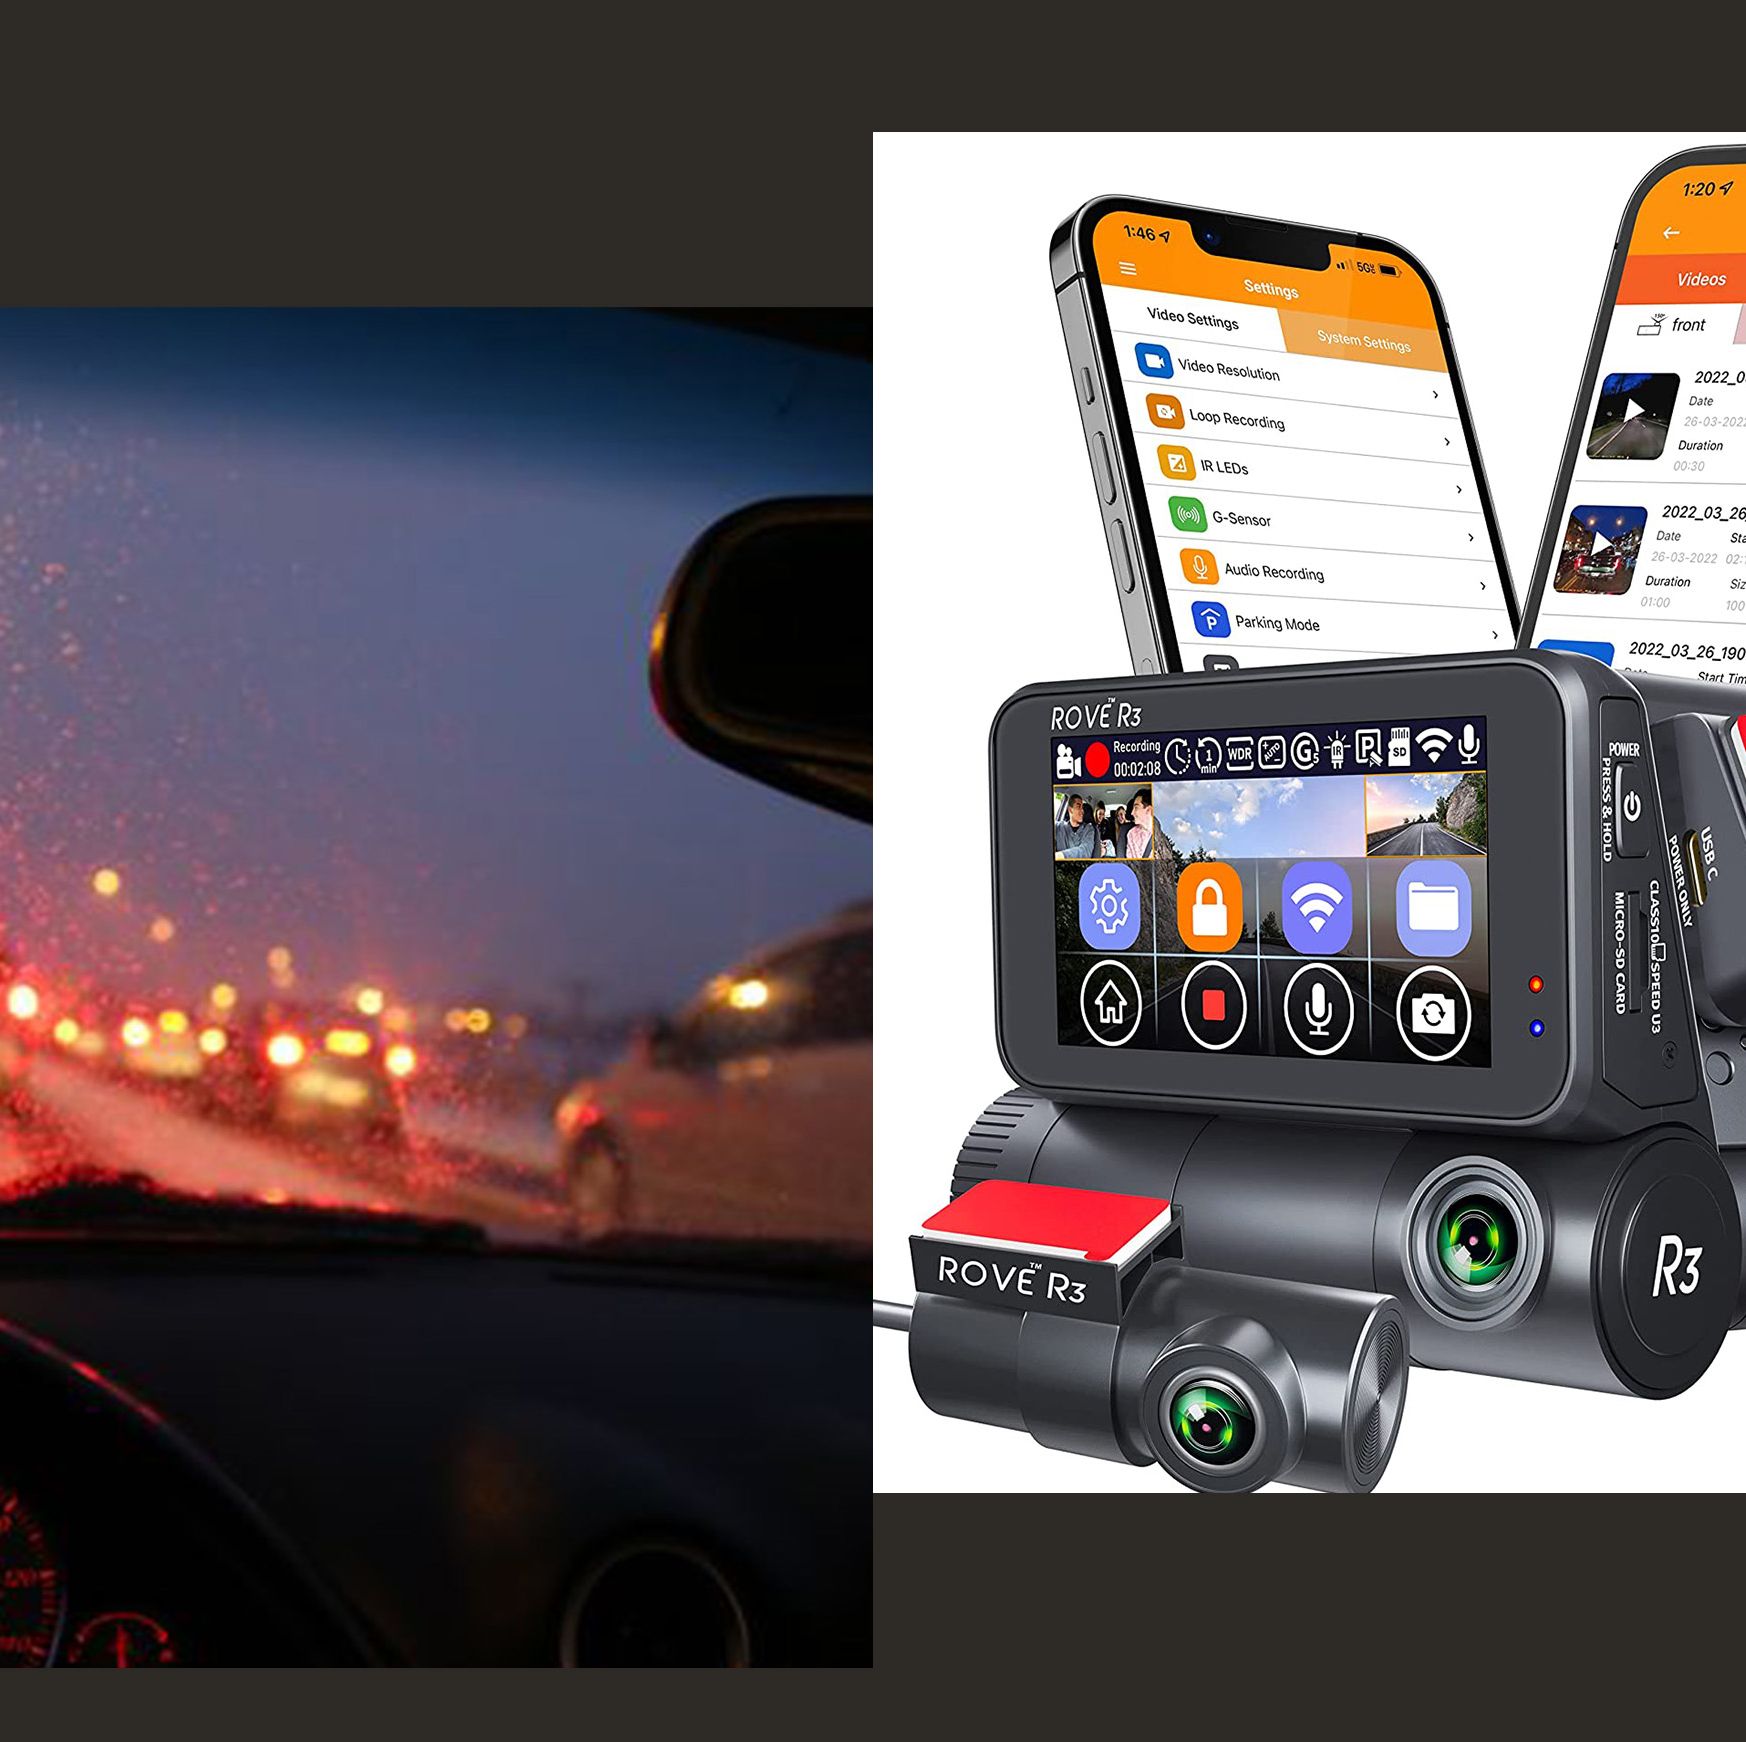 Deal Alert: Save $100 on a Top-of-the-Line Dashcam